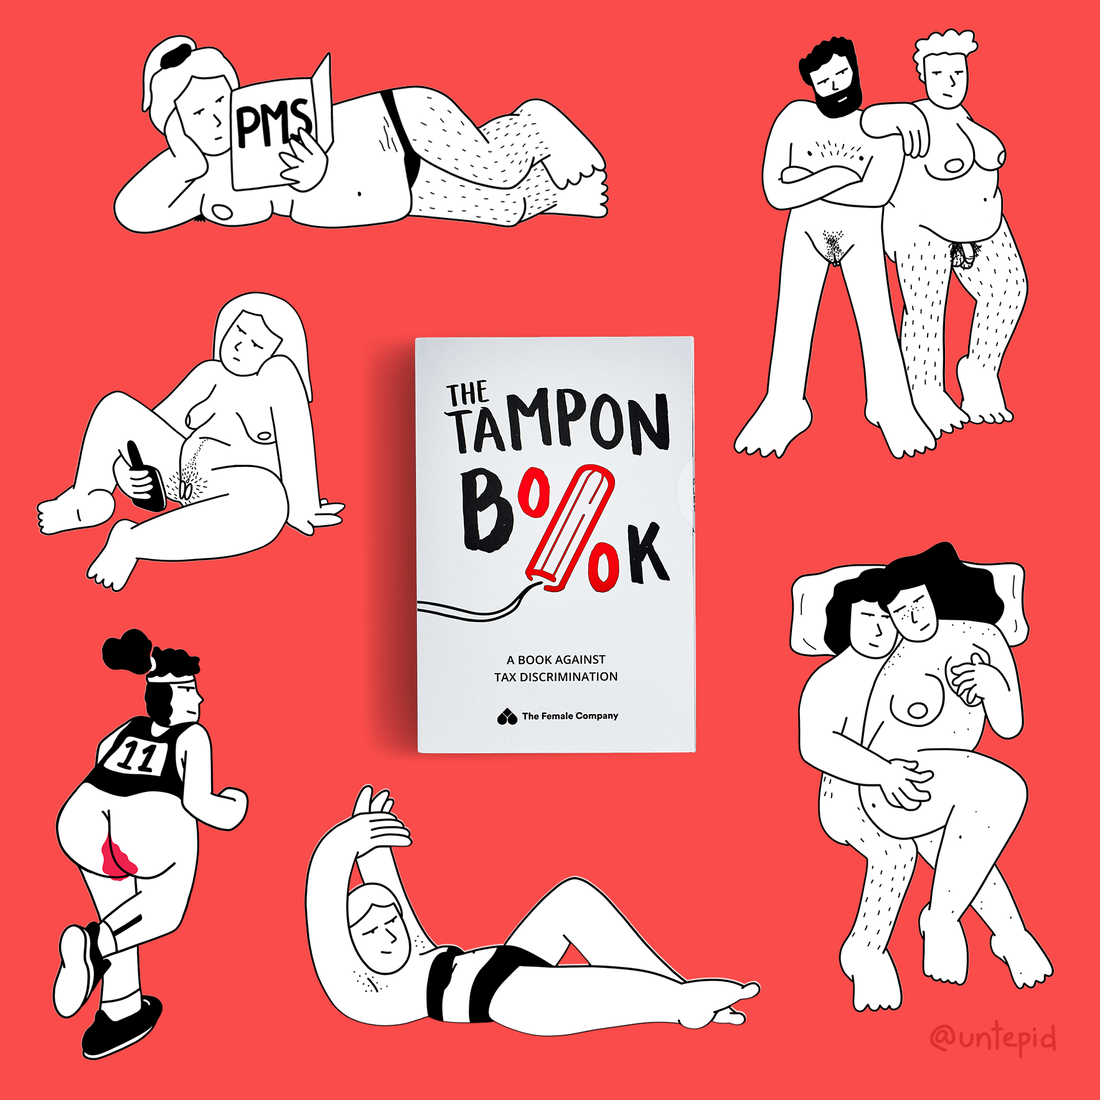 The Tampon Book, illustrated by Ana Curbelo, is the most awarded ad campaign of the year.